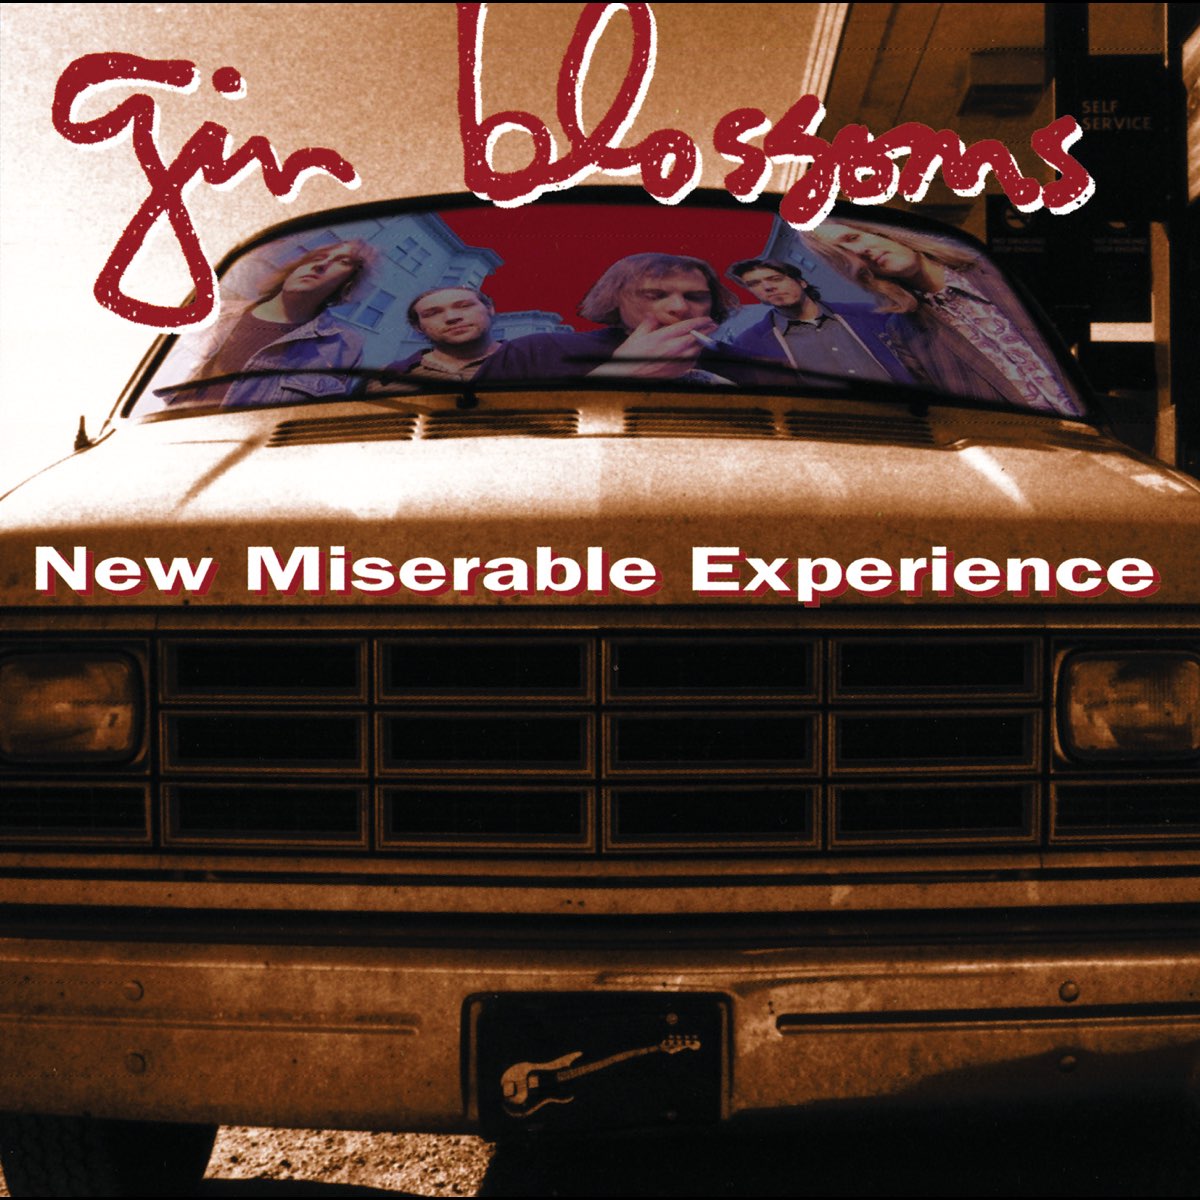 Gin Blossoms ‘New Miserable Experience’ album artwork